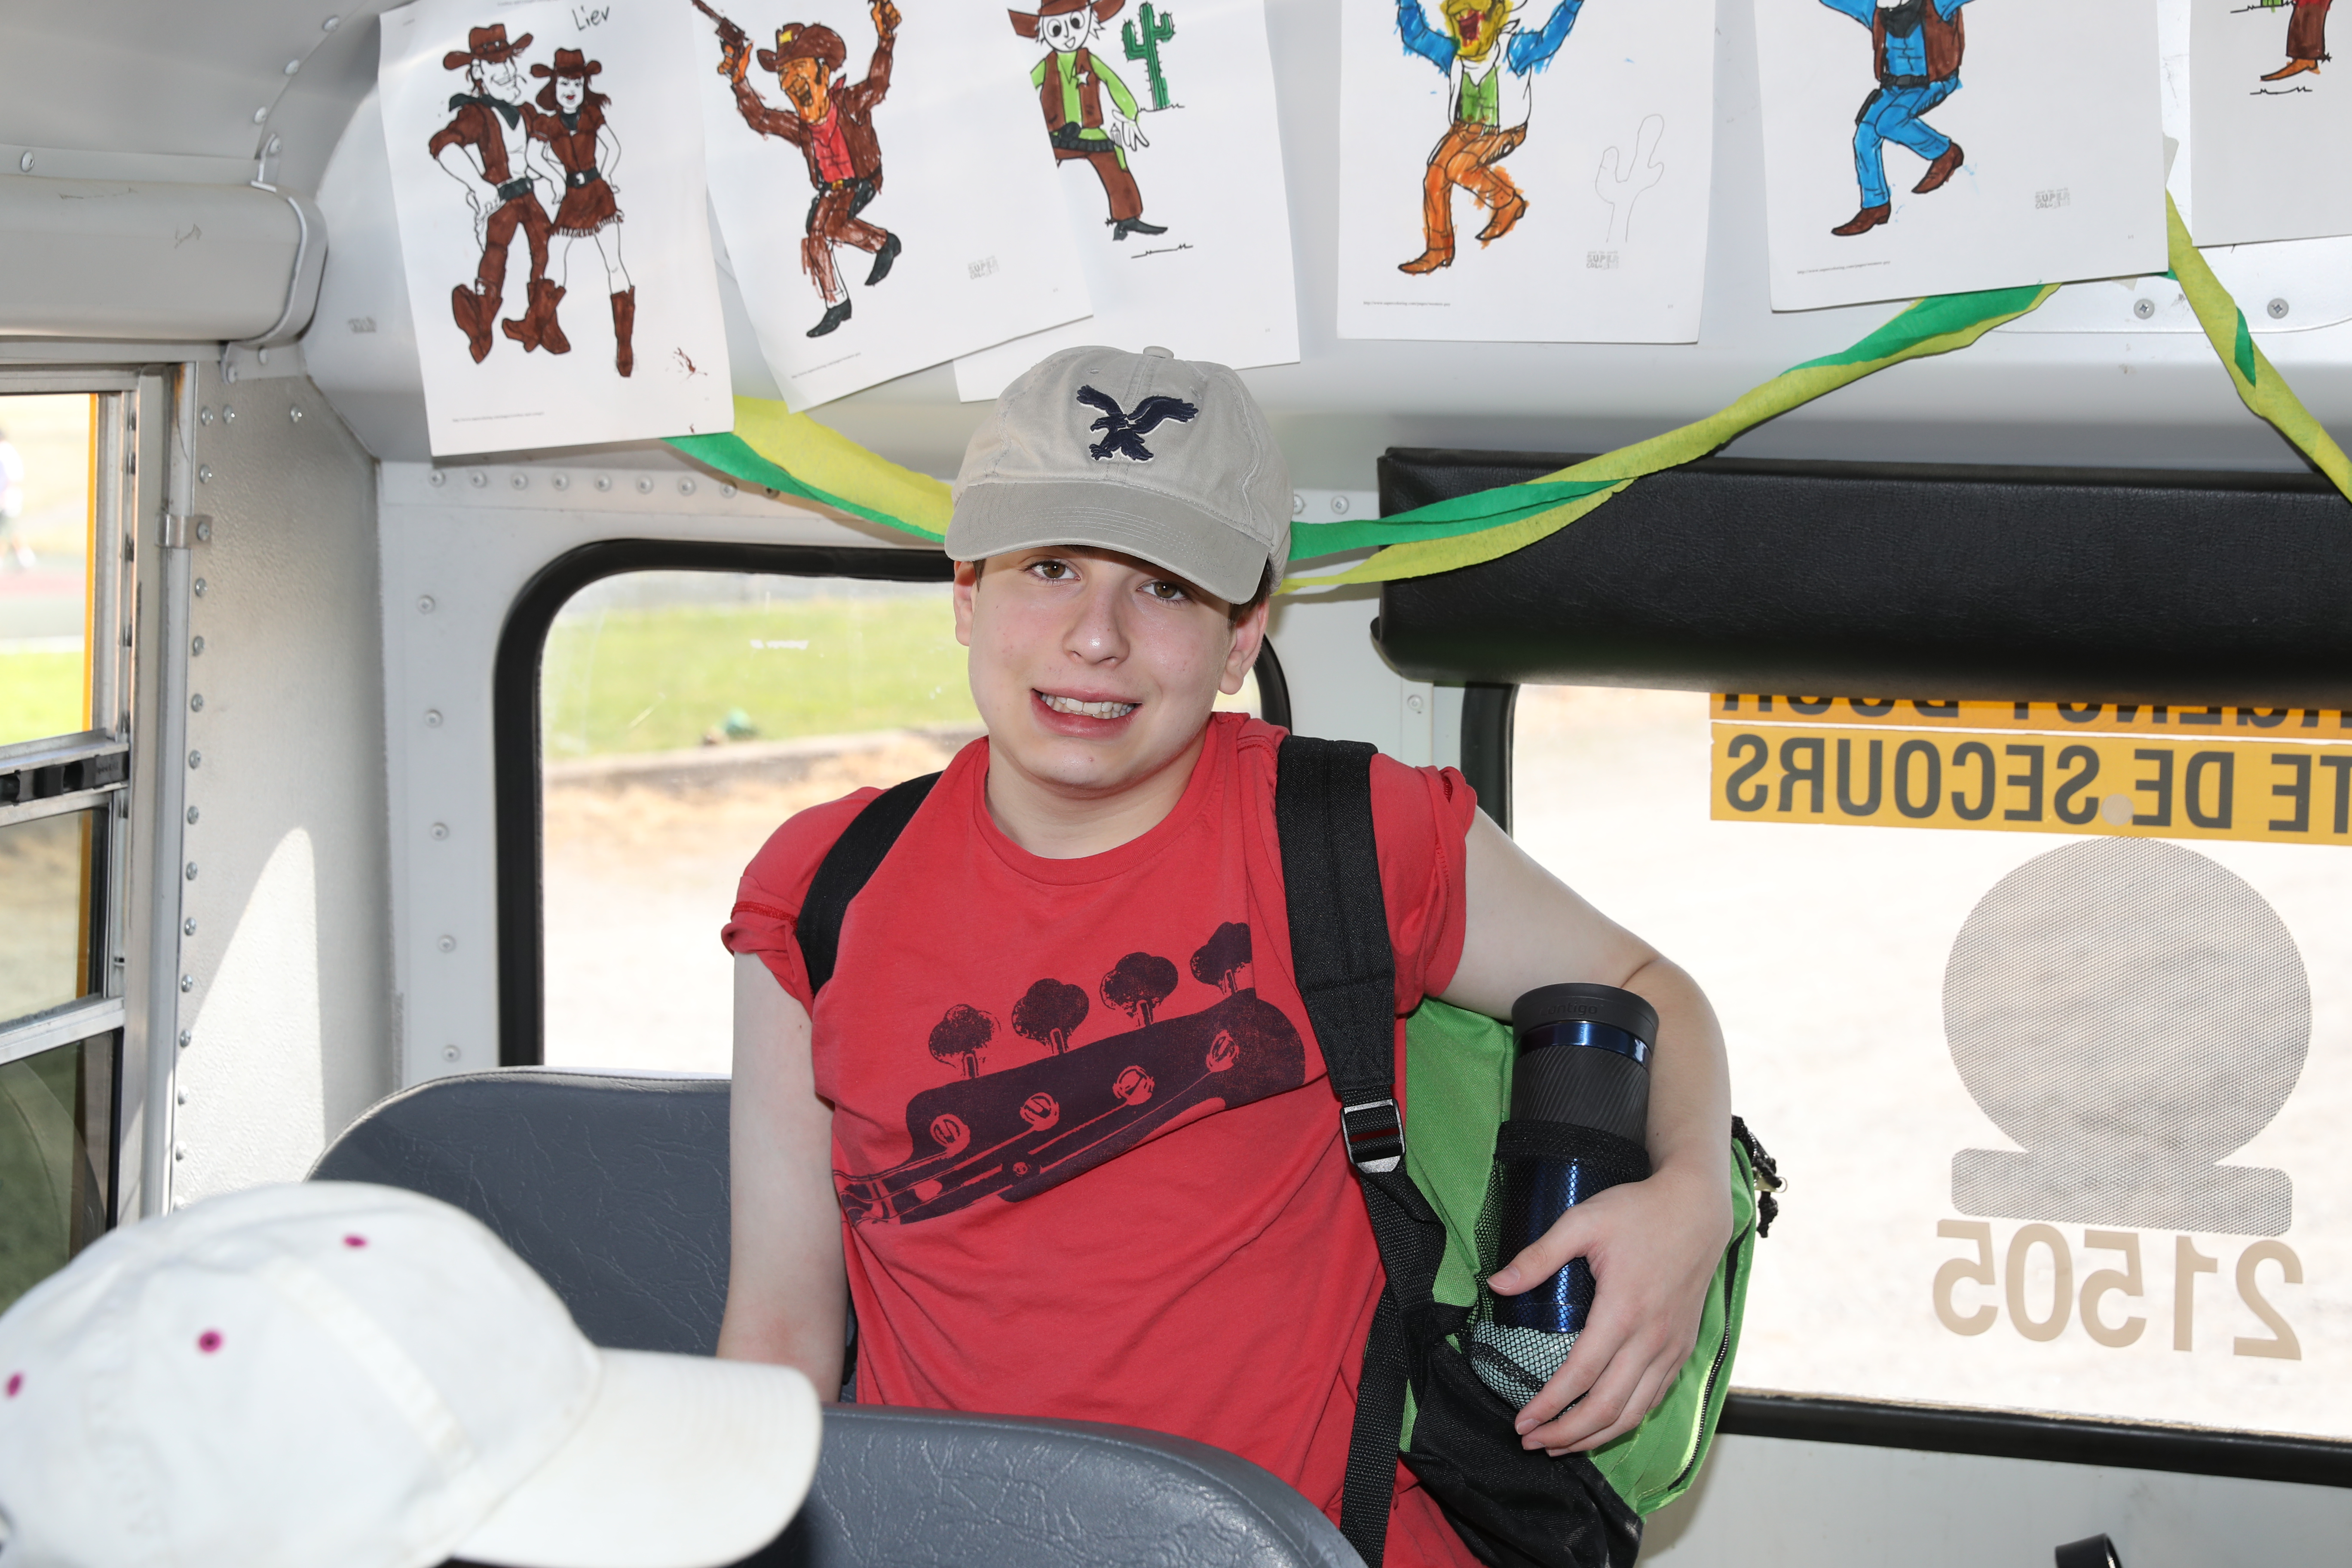 A Senior camper showing off the bus decorations after arriving at camp